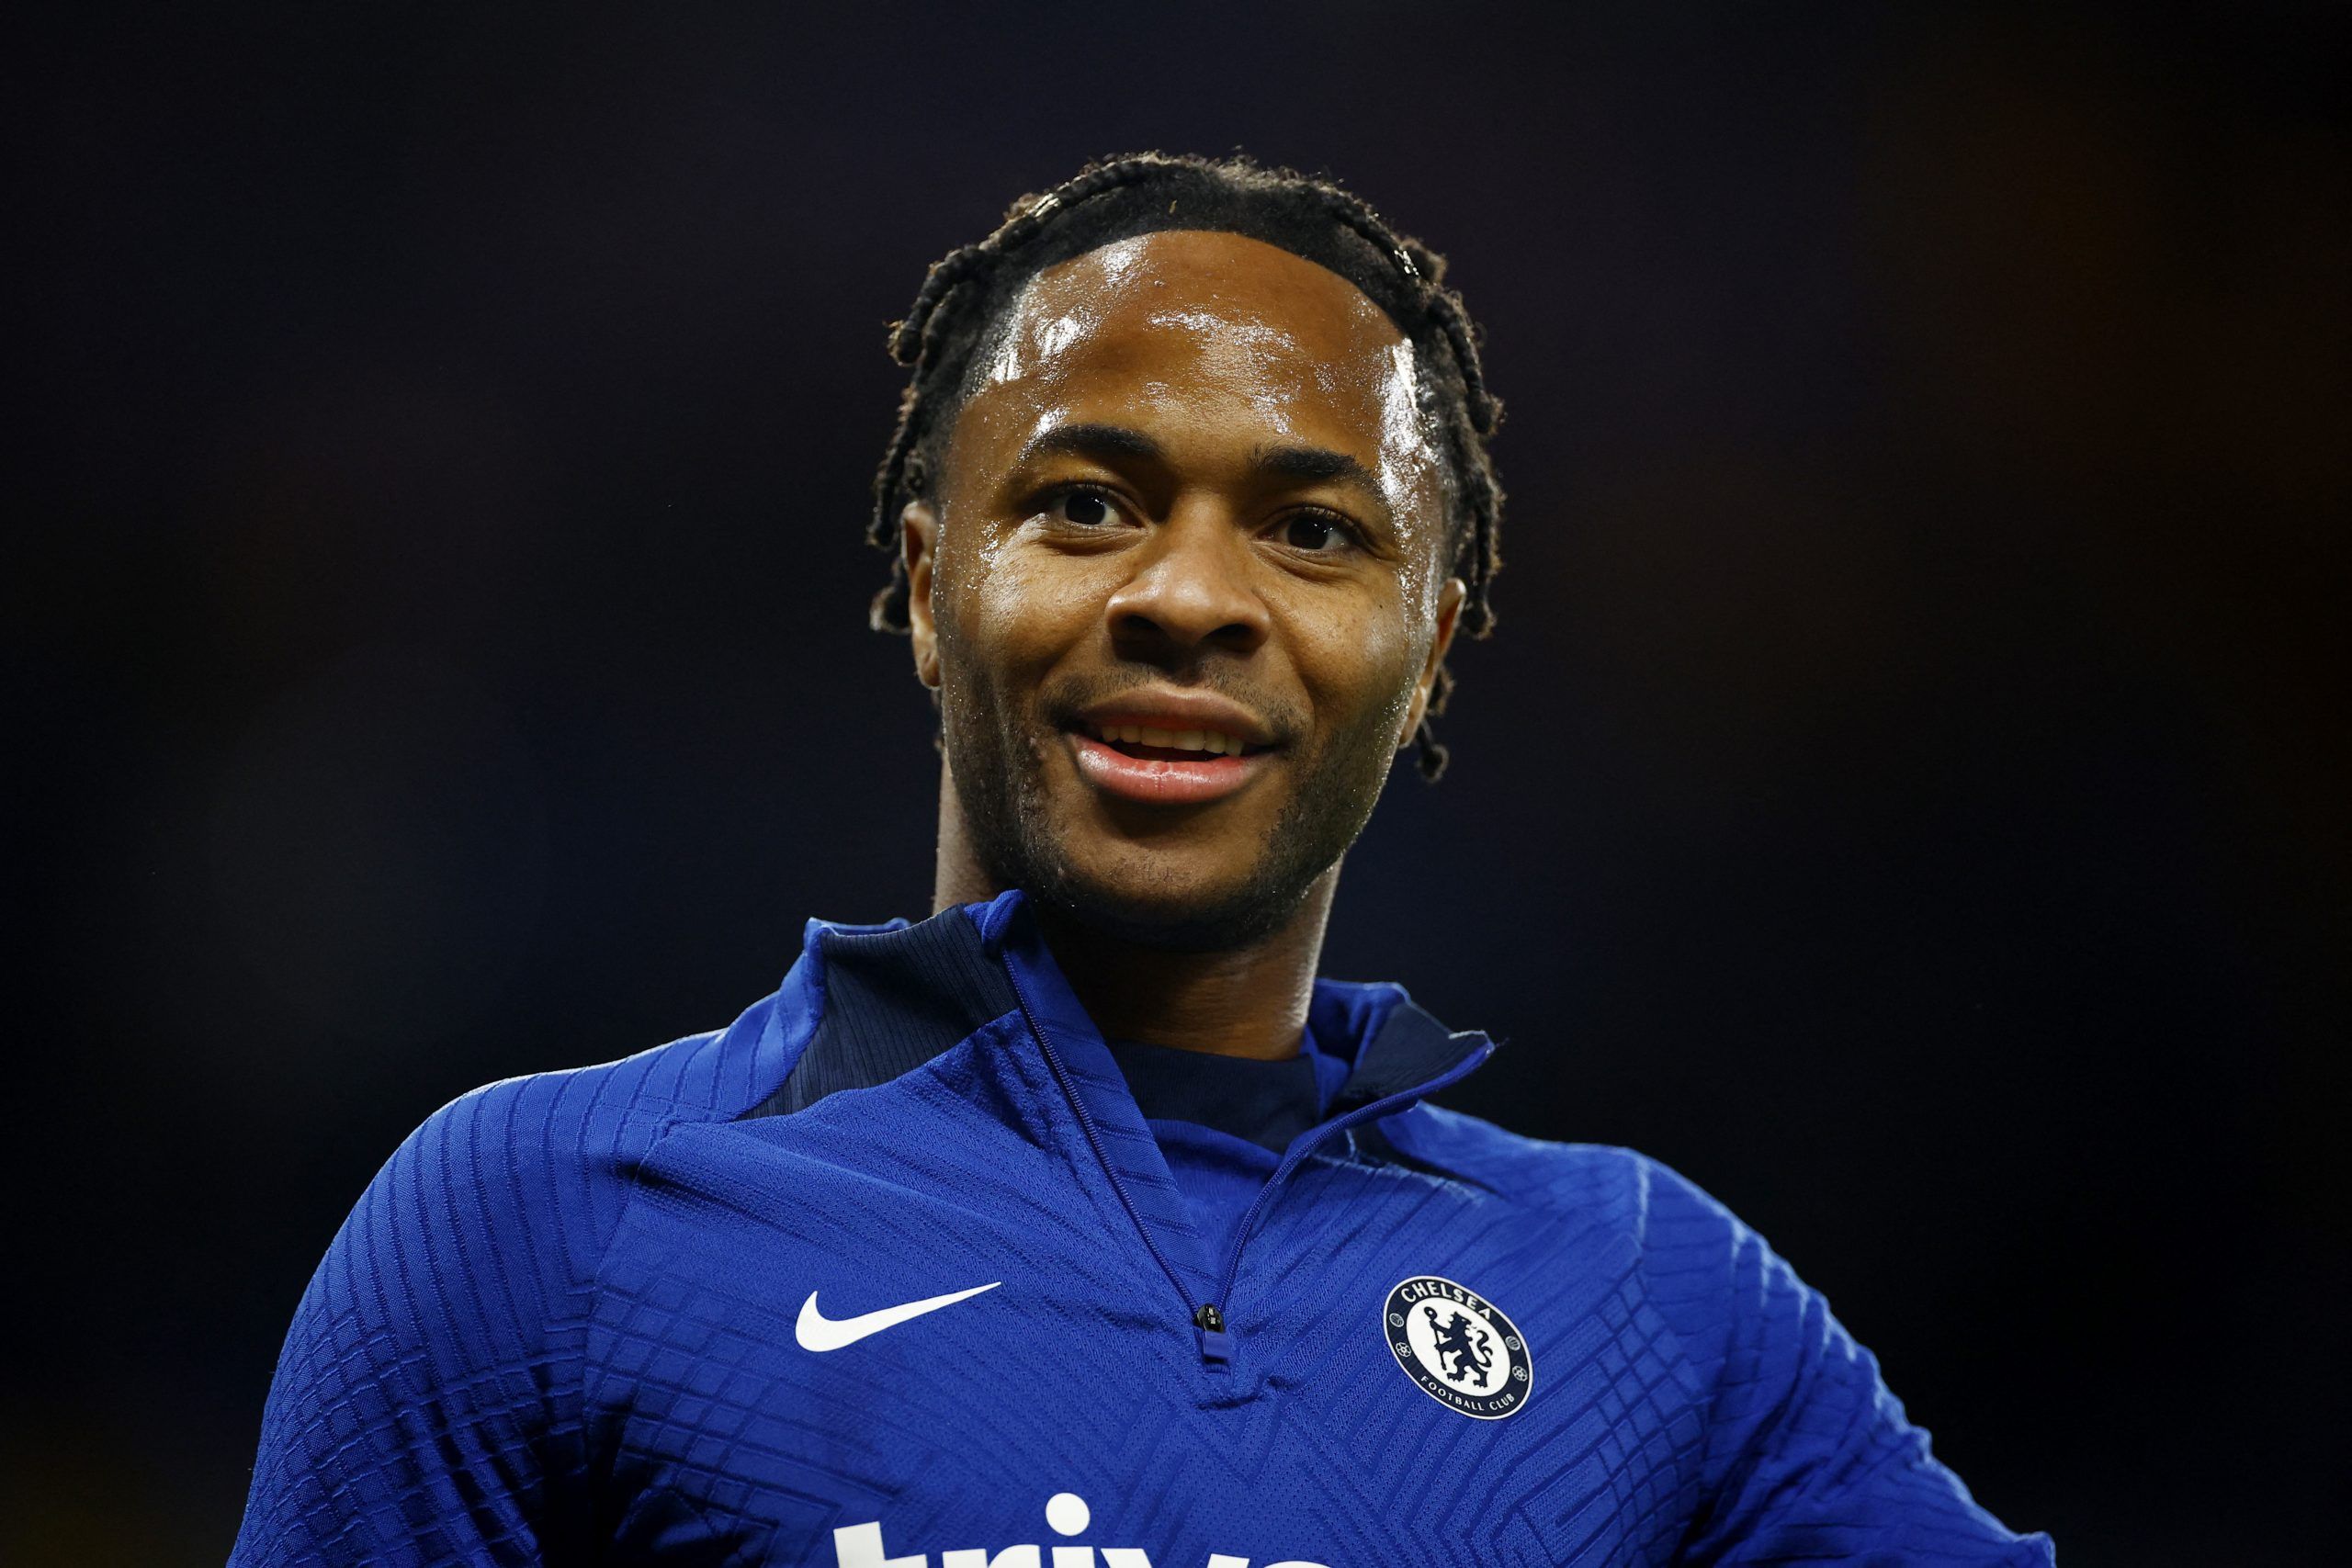 Soccer Football - Premier League - Chelsea v Manchester City - Stamford Bridge, London, Britain - January 5, 2023 Chelsea's Raheem Sterling during the warm up before the match Action Images via Reuters/John Sibley EDITORIAL USE ONLY. No use with unauthorized audio, video, data, fixture lists, club/league logos or 'live' services. Online in-match use limited to 75 images, no video emulation. No use in betting, games or single club /league/player publications.  Please contact your account represen